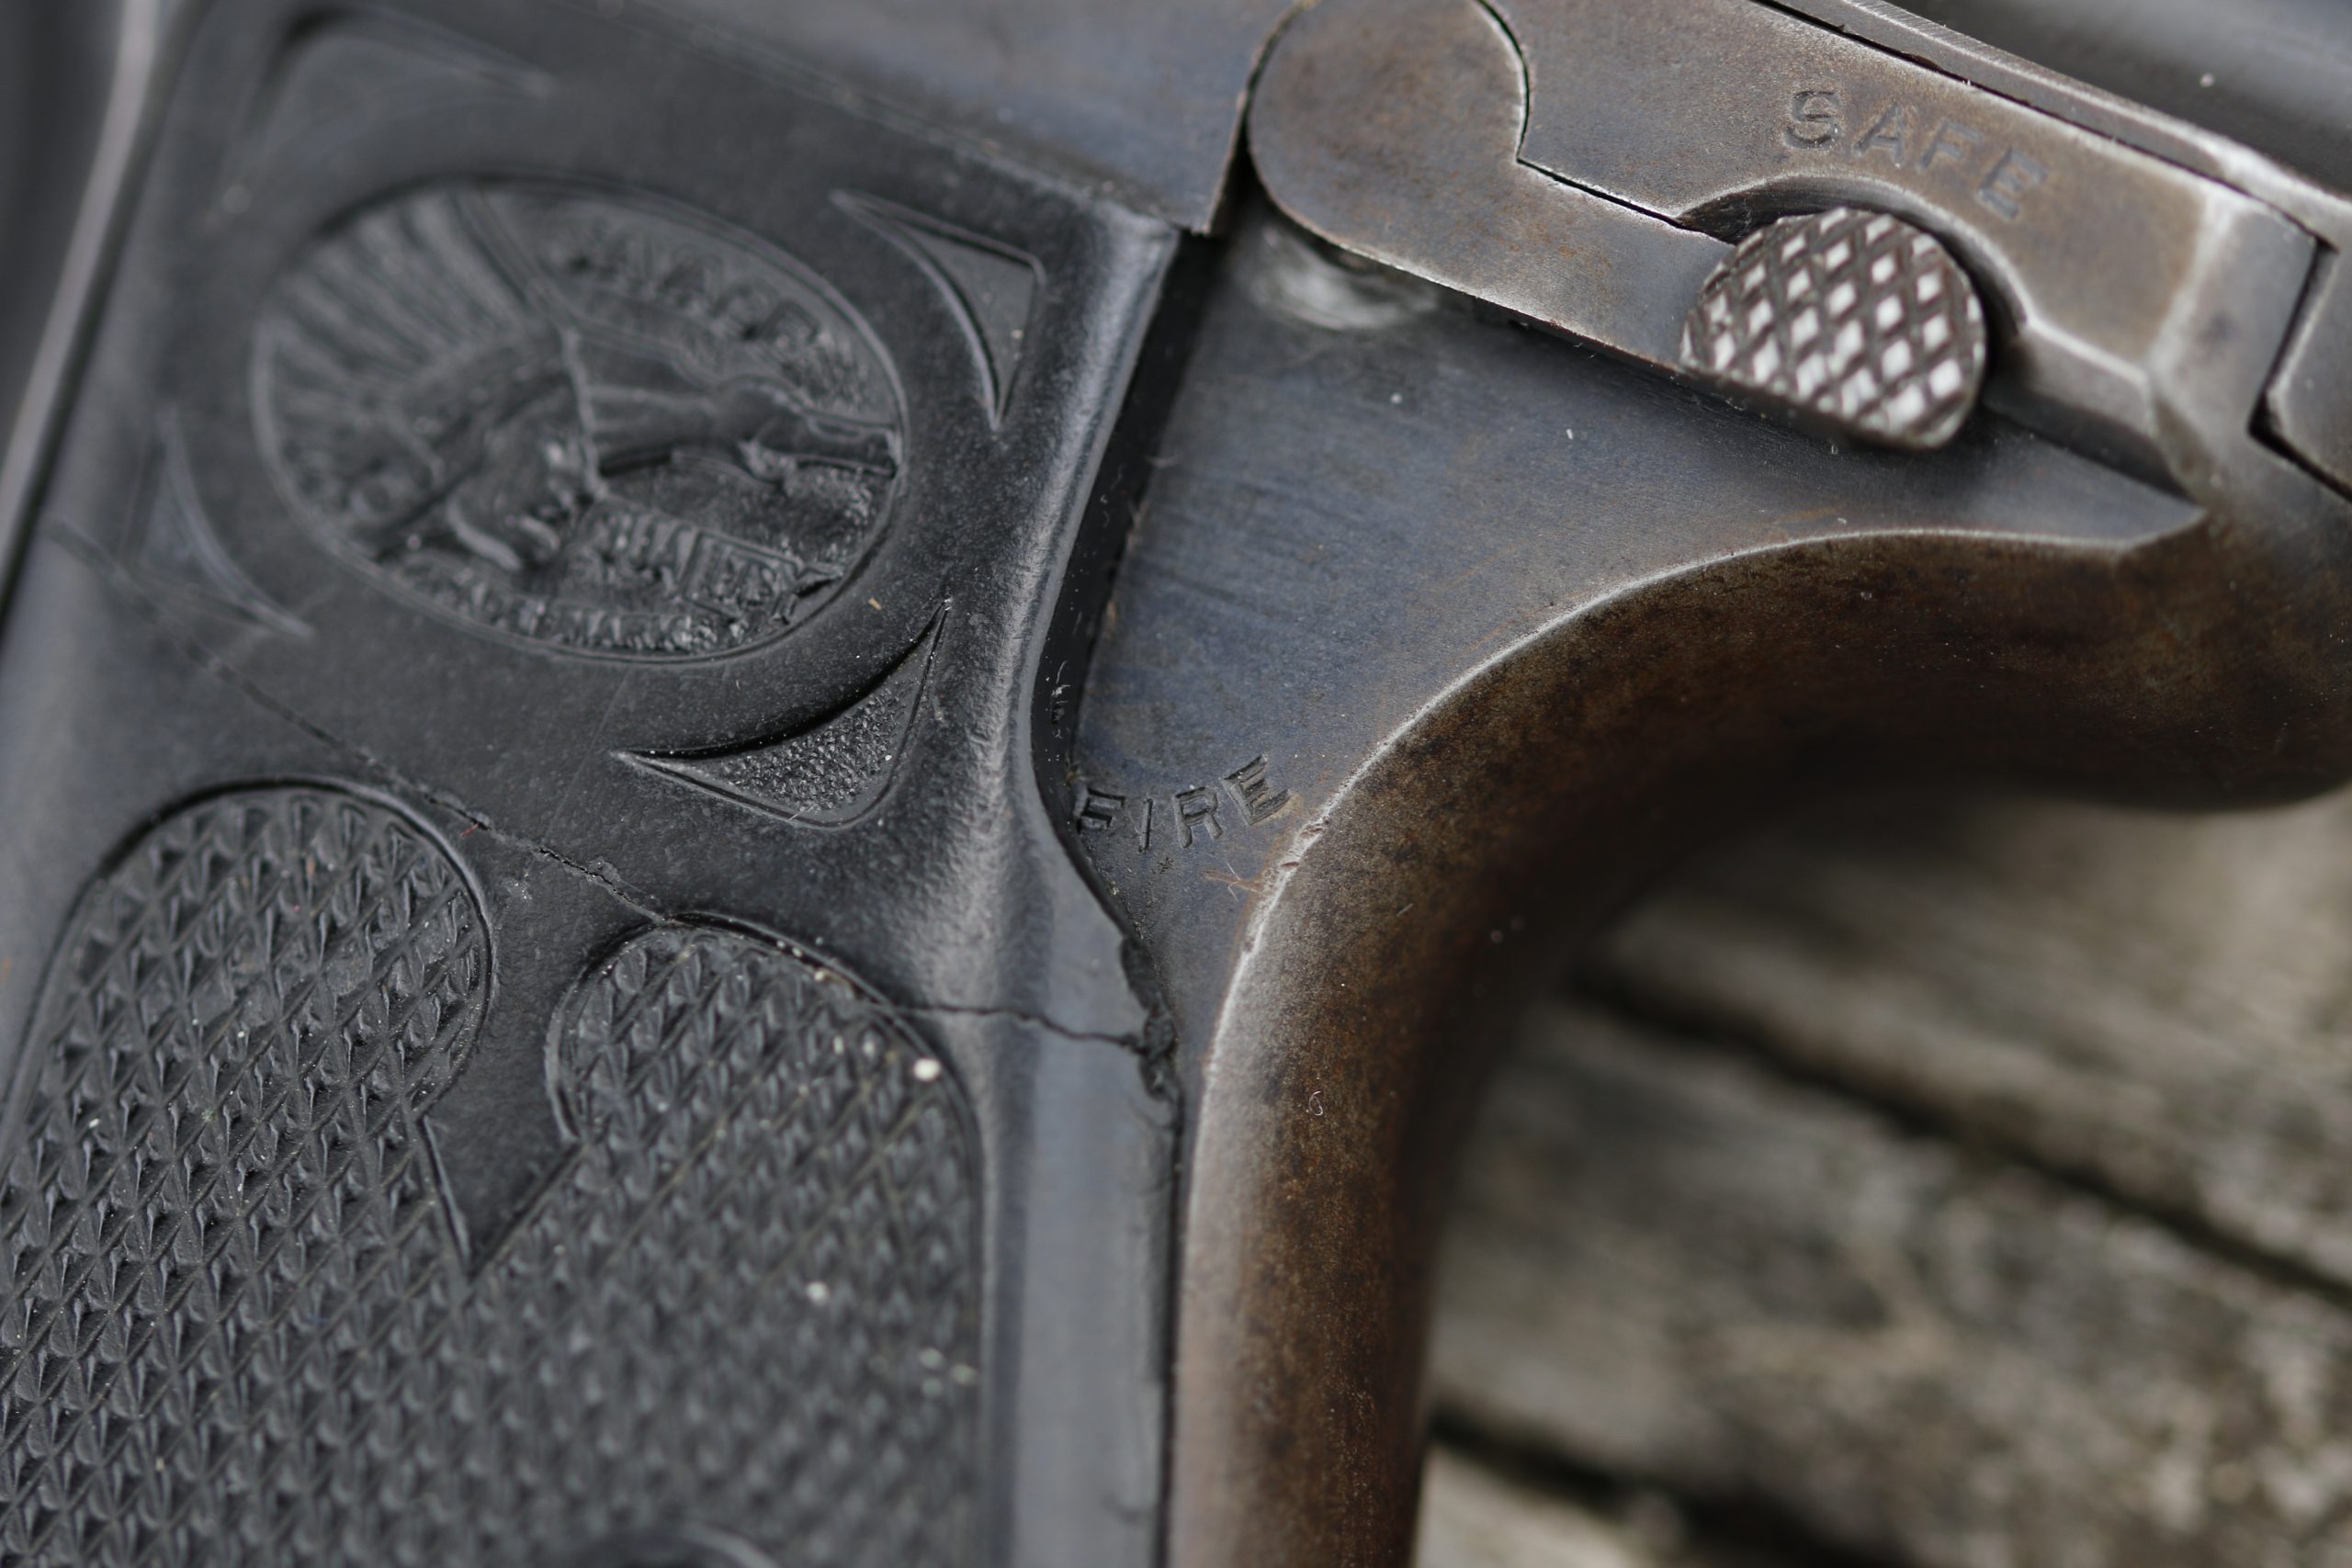 Savage 1907 grips - prone to drying out and cracking after 100 years.